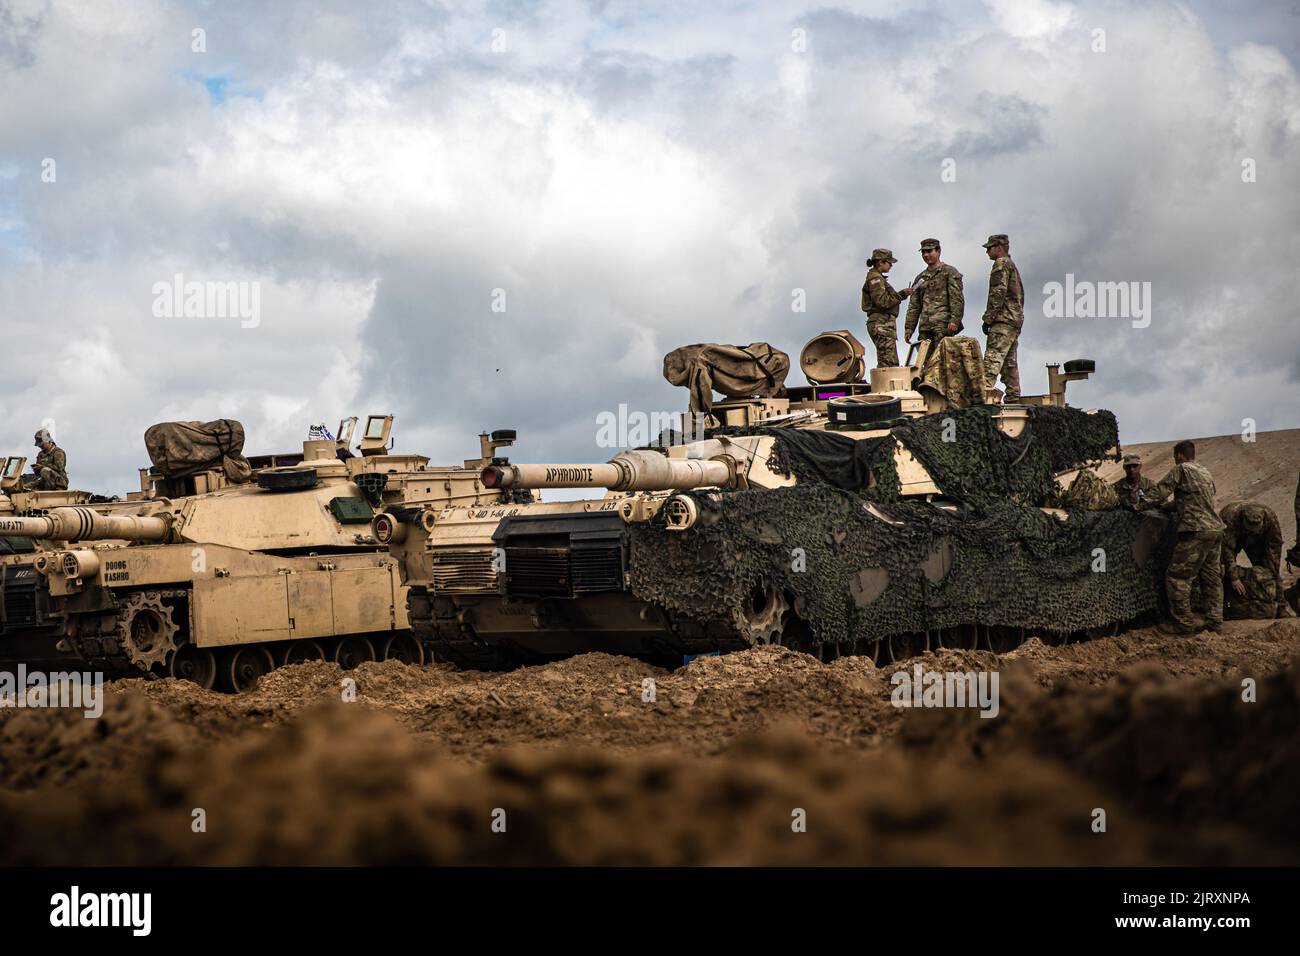 U.S. Army Staff Sgt. Iris Barajas, a tank commander, assigned to the 1st Battalion, 66th Armor Regiment, 3rd Armored Brigade Combat Team, 4th Infantry Division, evaluates her Soldiers as part of a gunnery skills test held at Pabrade, Lithuania, July 19, 2022. (U.S. Army National Guard photo by Sgt. Agustín Montañez) Stock Photo